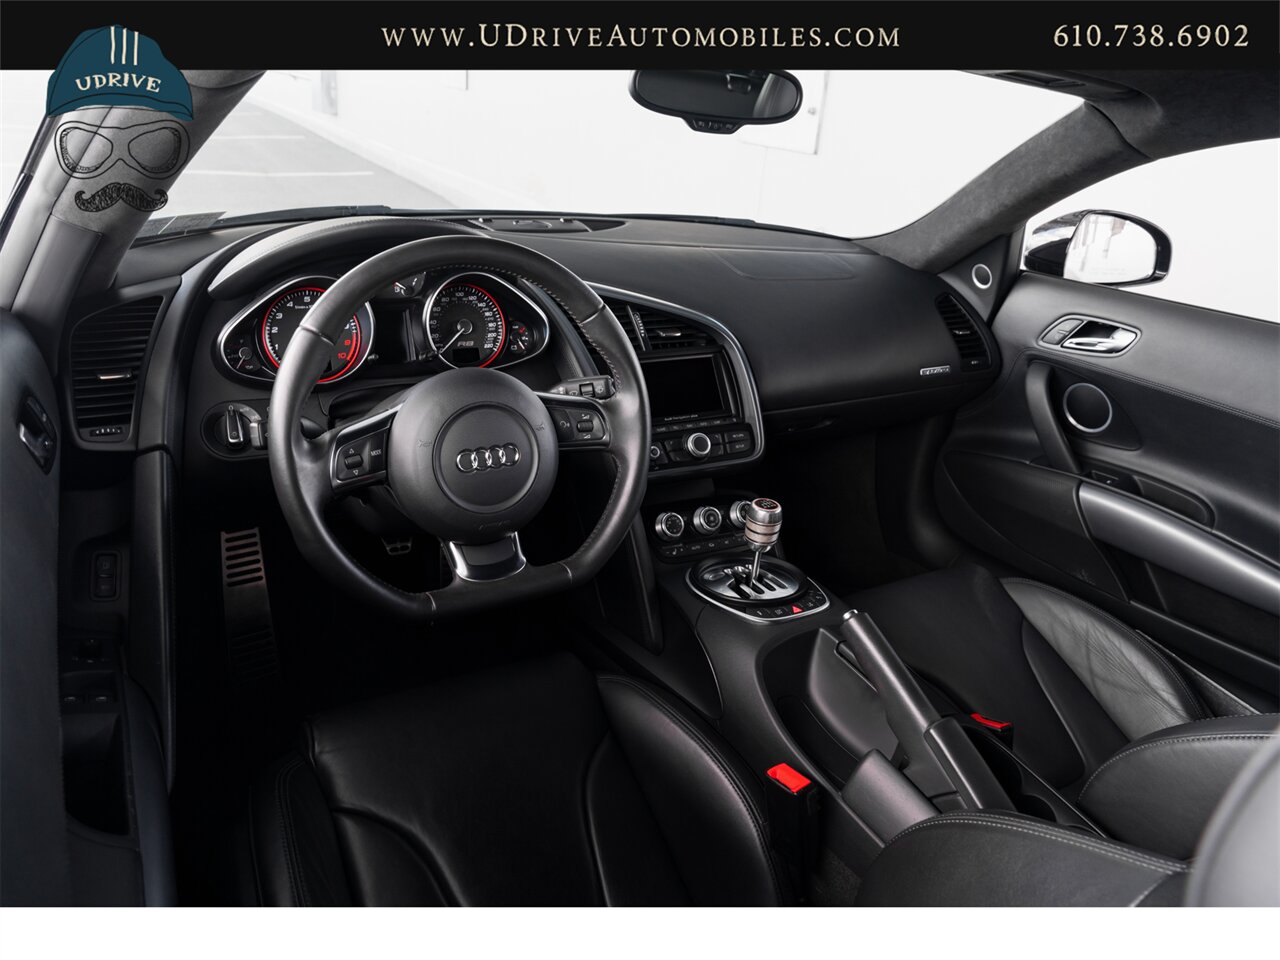 2011 Audi R8 5.2 Quattro  V10 6 Speed Manual - Photo 31 - West Chester, PA 19382